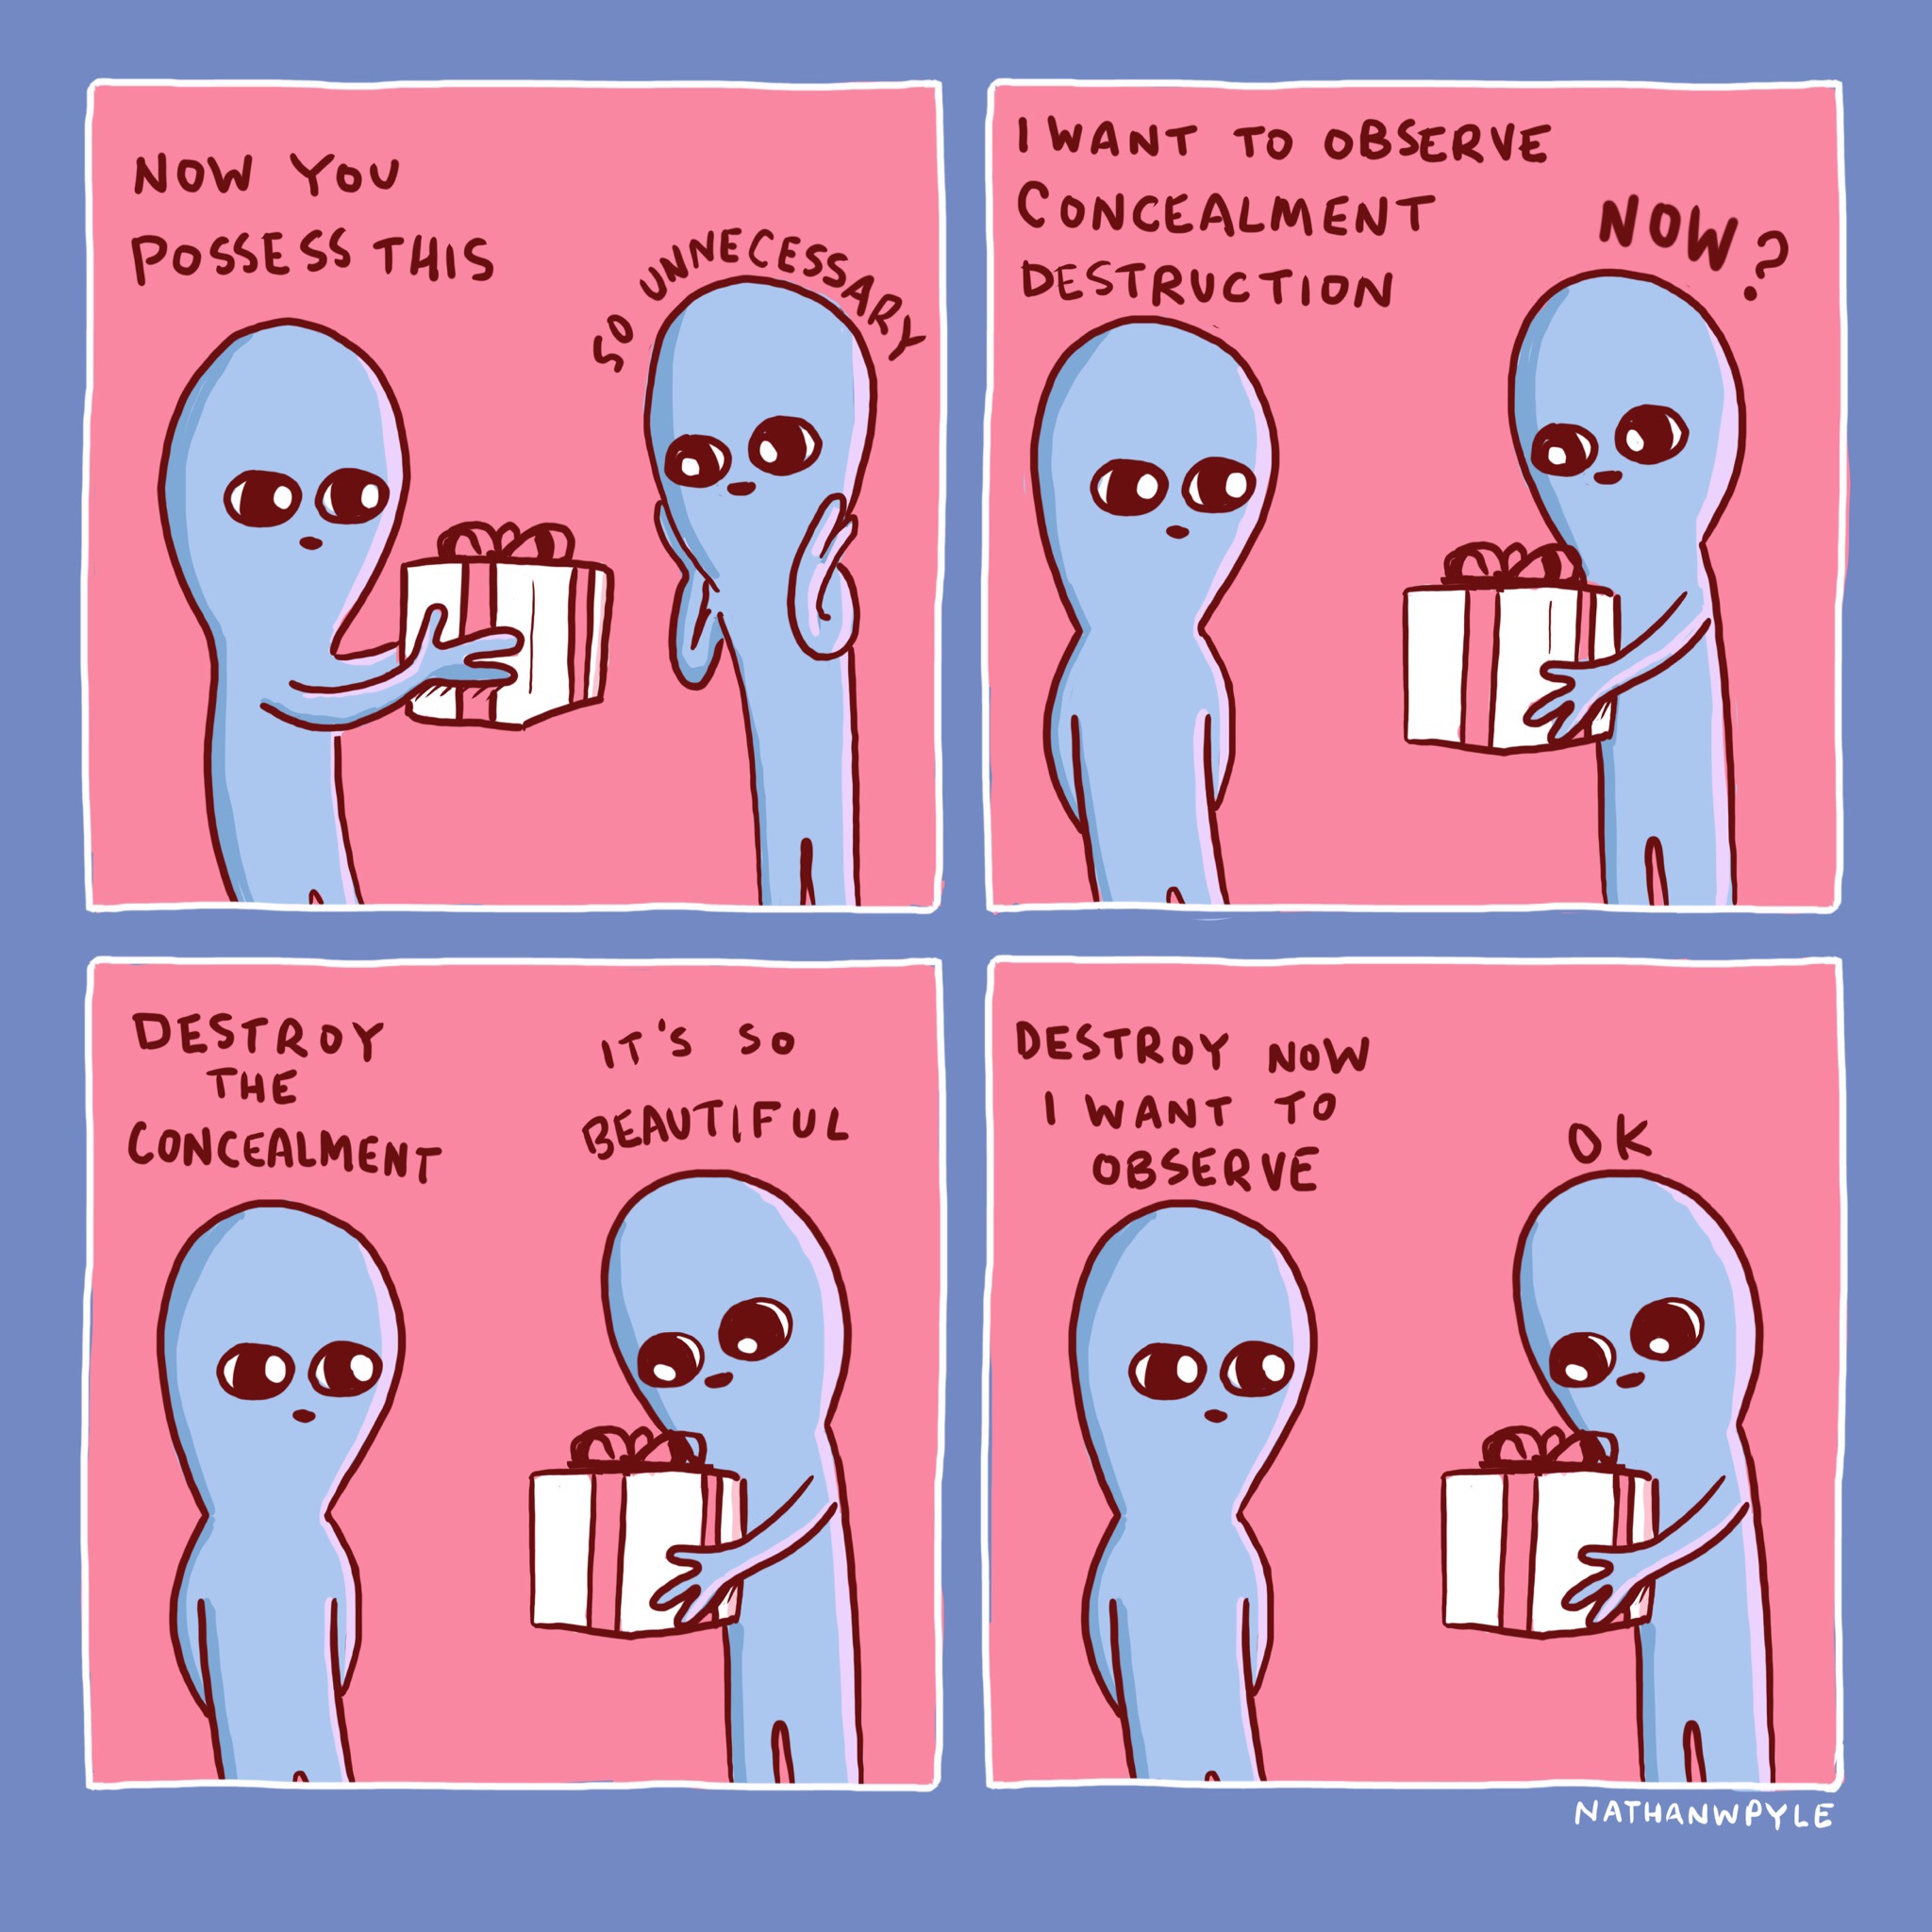 nathan pyle strange planet - Now You Possess This I Want To Observe Concealment Destruction Now 2 Destroy The Concealment Beautiful Destroy Now I Want To Observe Nathanwpyle